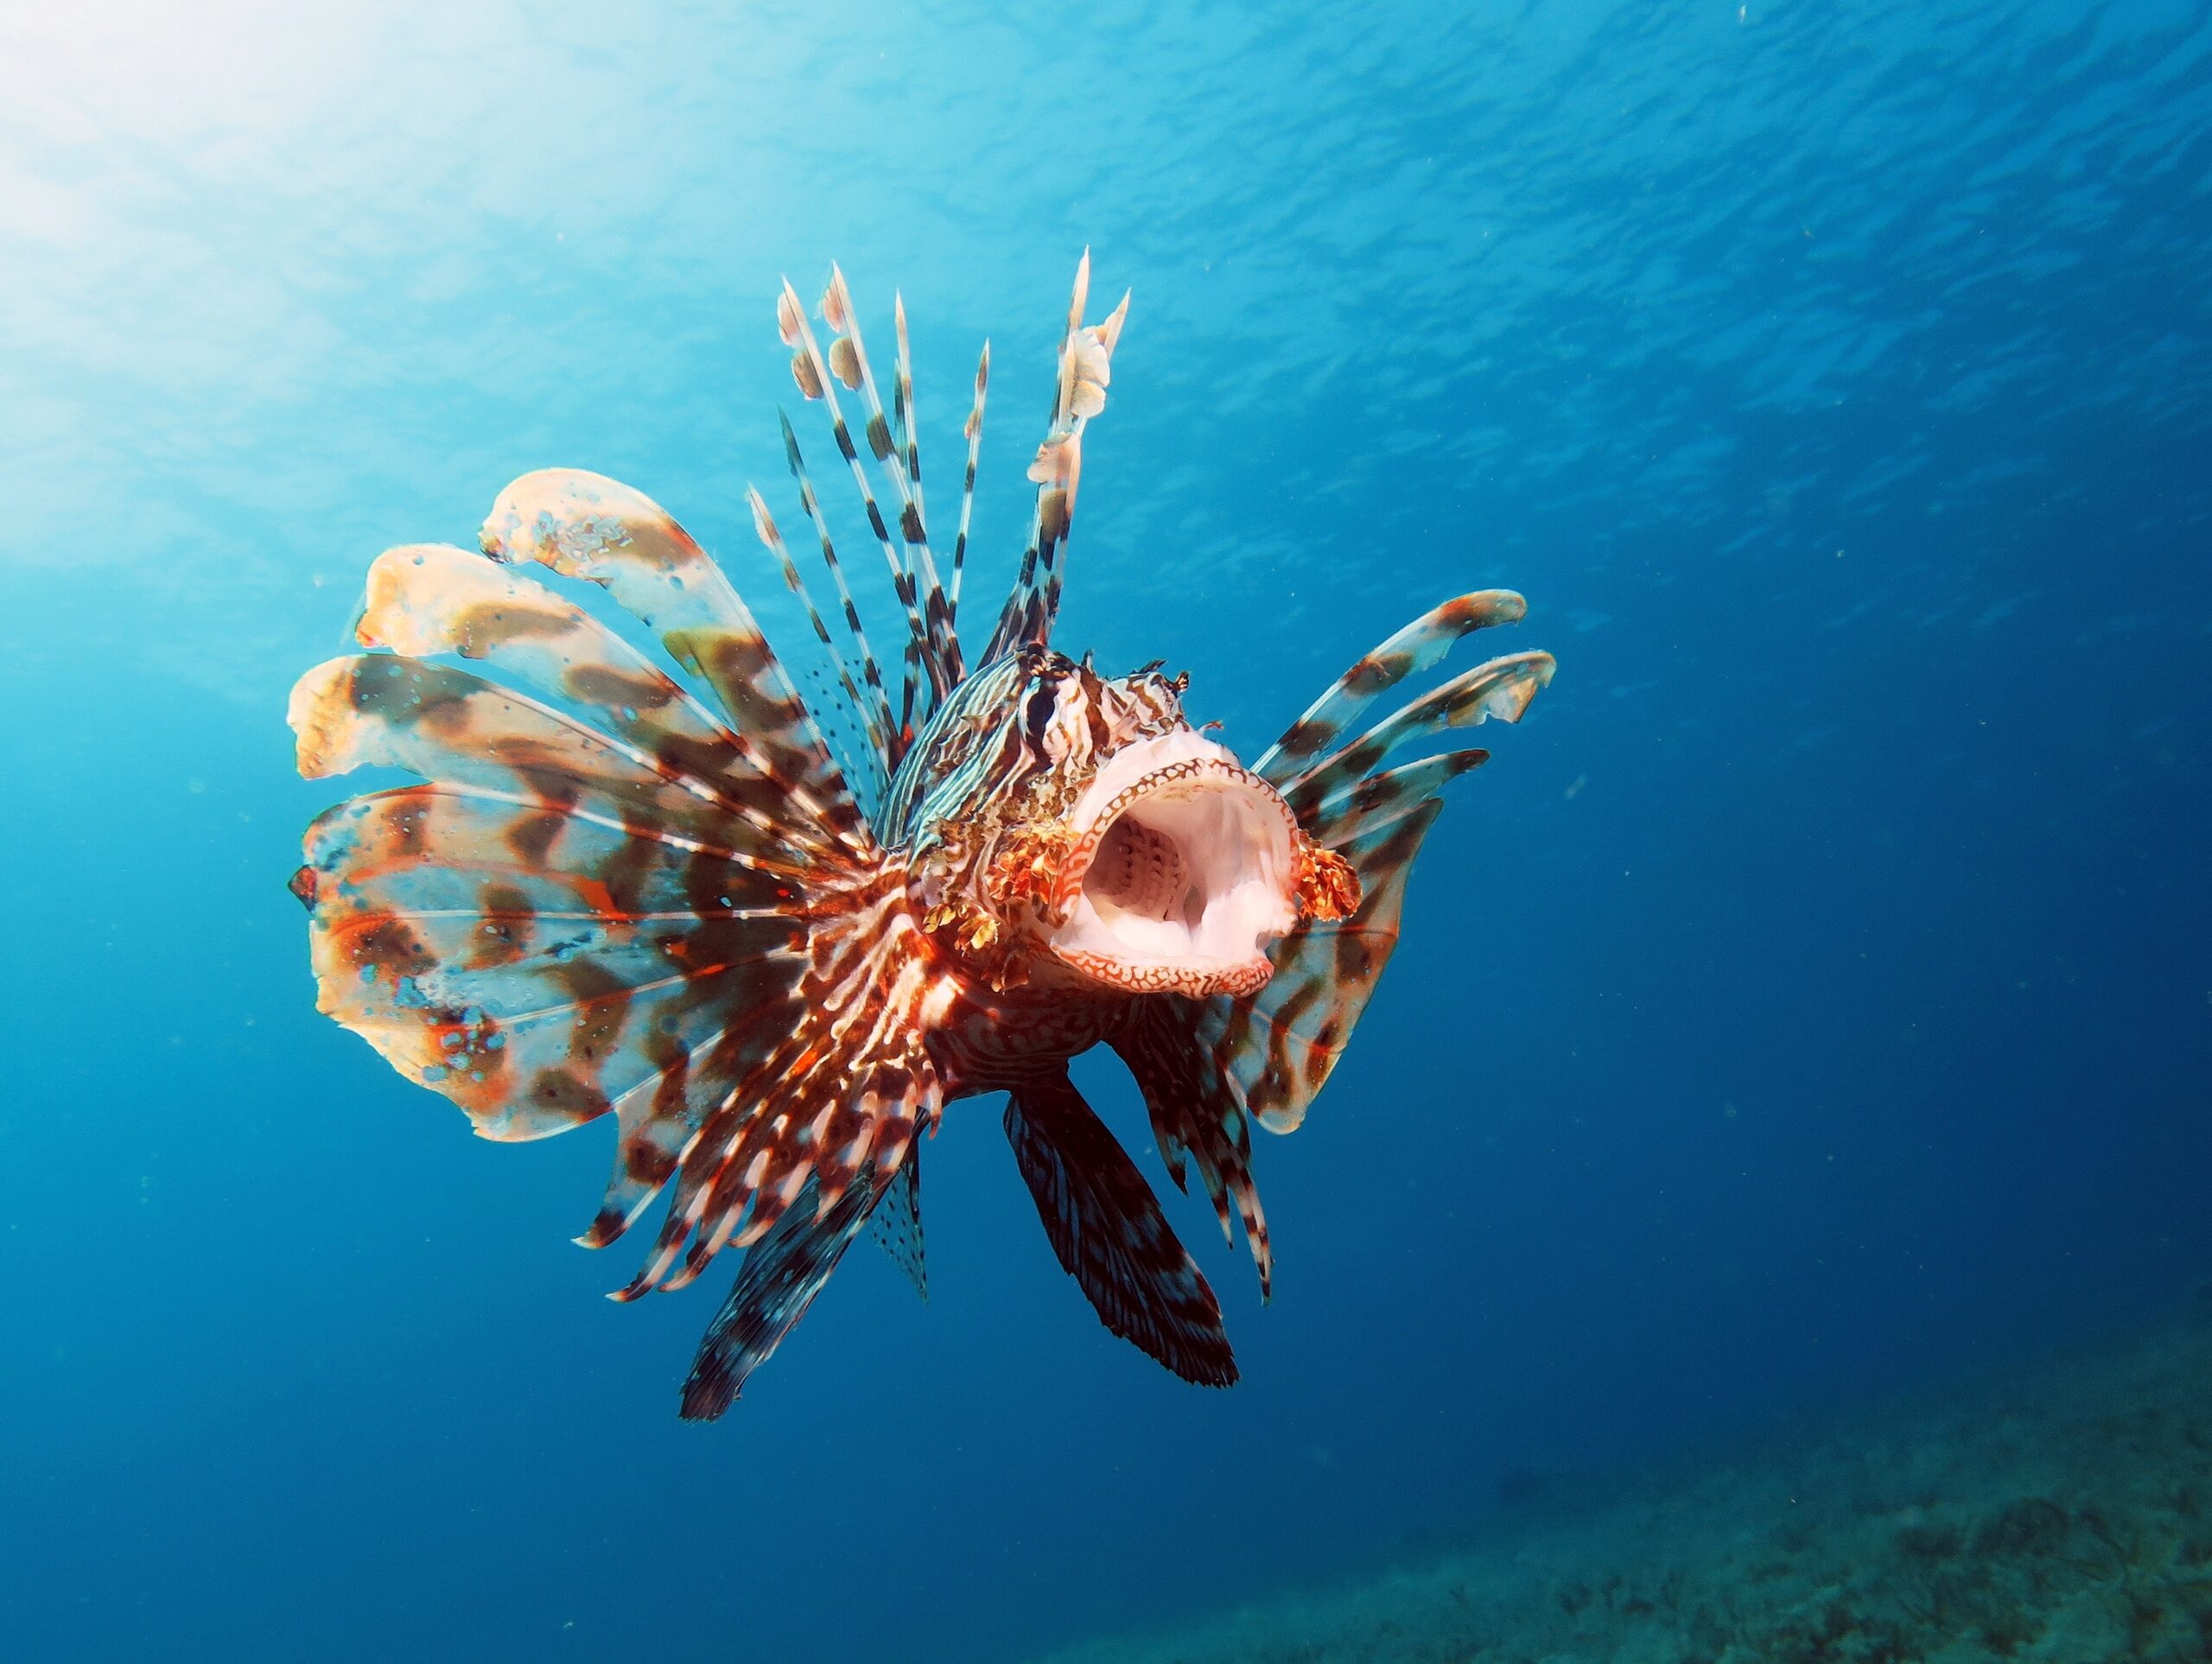 Invasive lionfish are delicious — but is it safe to eat them? - Oceana